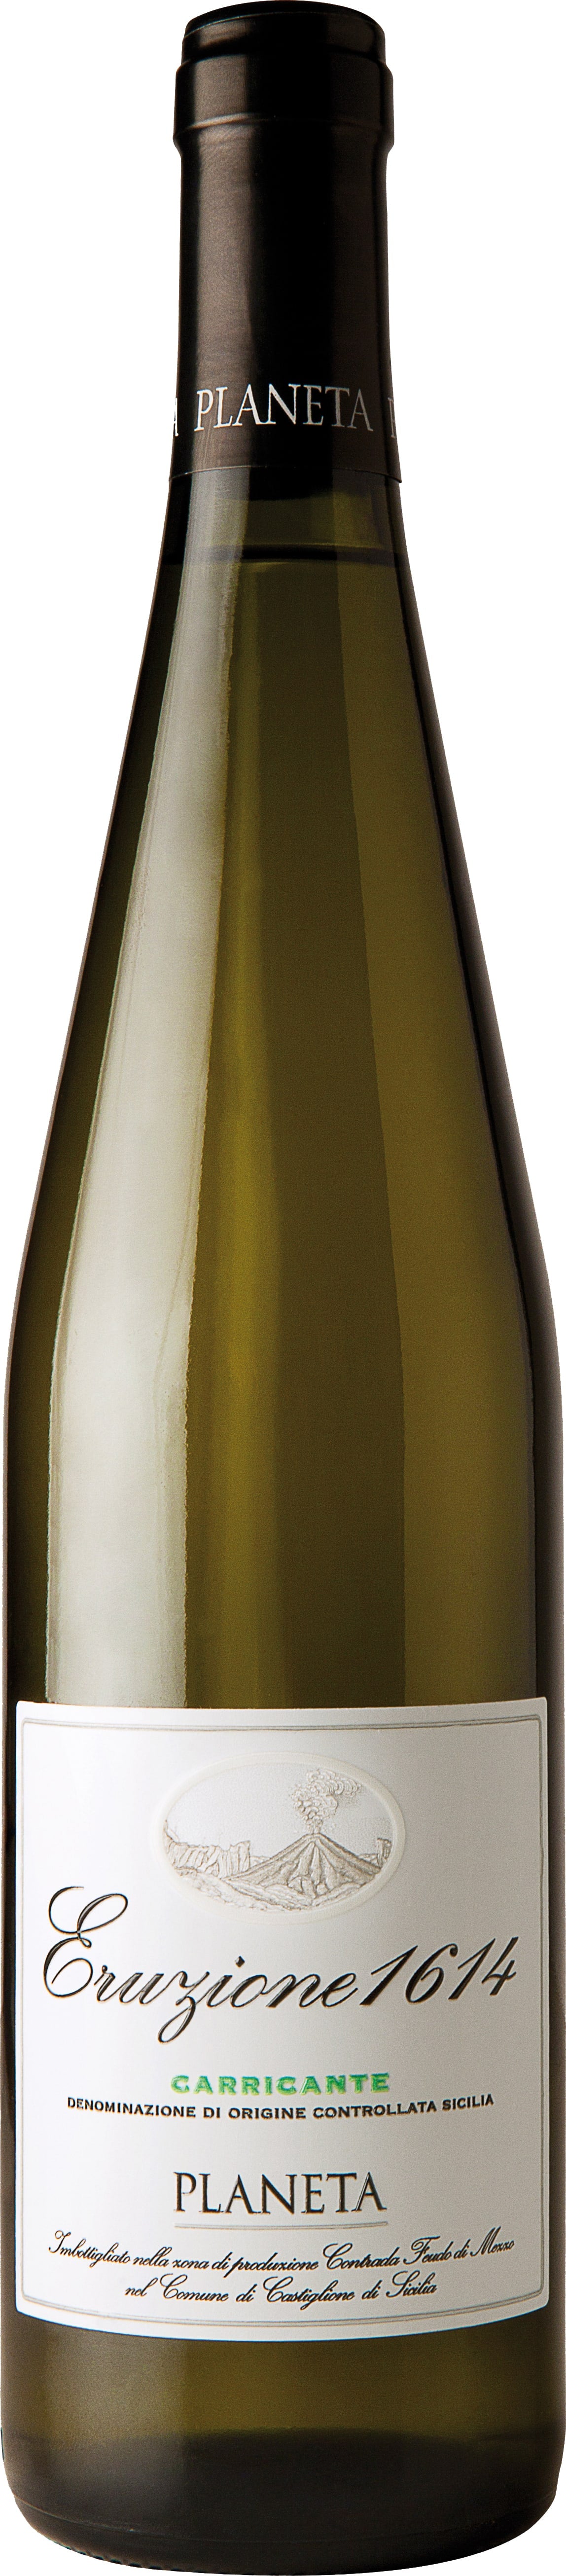 Planeta Eruzione Bianco 1614 Carricante 2020 75cl - Buy Planeta Wines from GREAT WINES DIRECT wine shop